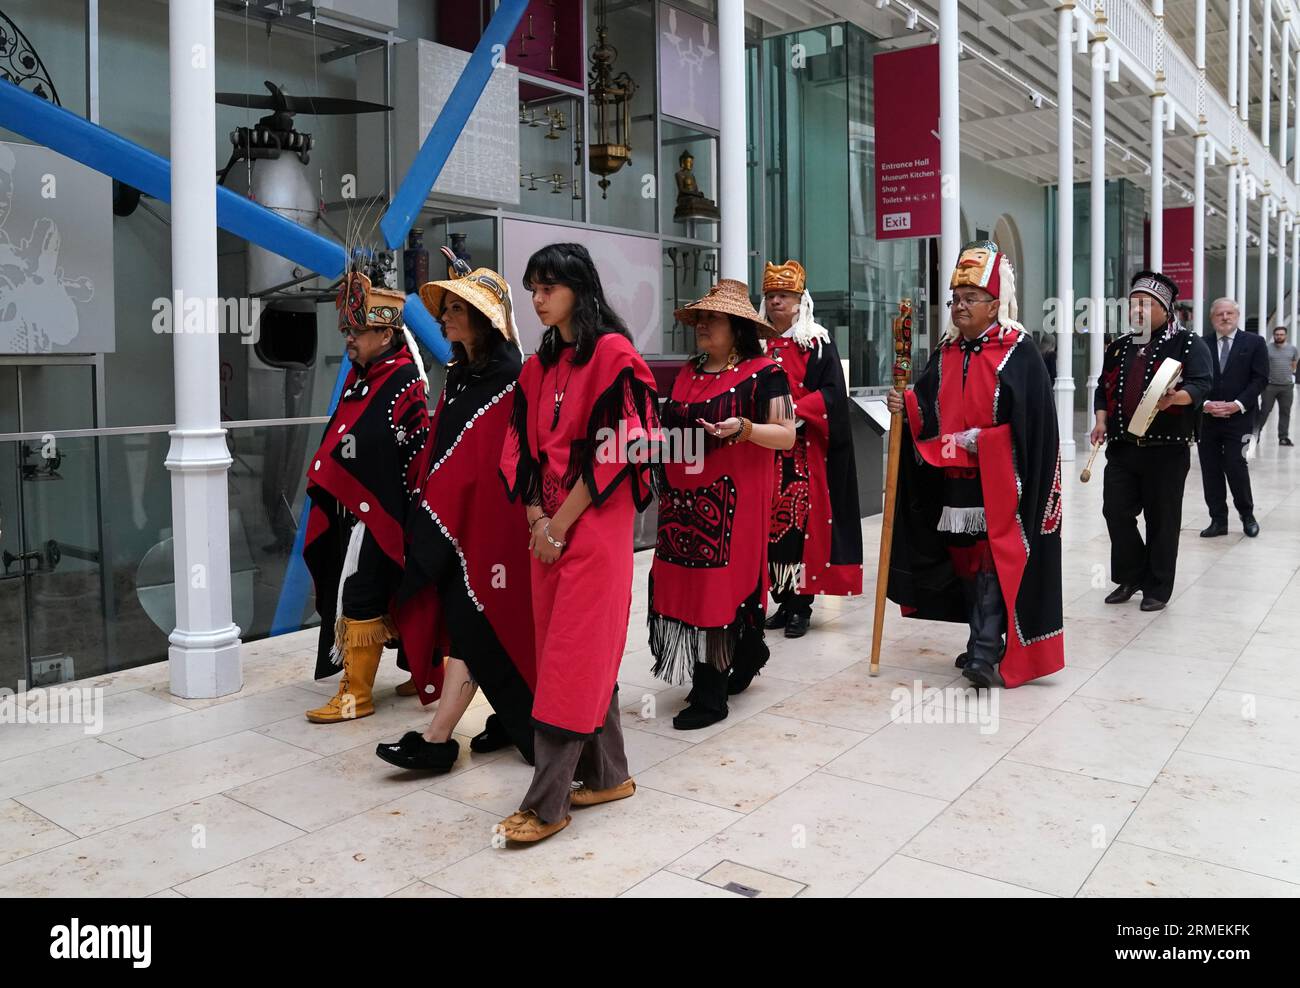 Earl Stephen's(who has the Nisga'a cultural name Chief Ni'is Joohl) and Dr Amy Parent(who has the Nisga'a cultural name Noxs Ts'aawit) lead the delegation from the Nisga'a nation as they make their way through the museum during a visit to the National Museum of Scotland in Edinburgh, ahead of the return of 11-metre tall memorial pole to what is now British Columbia. The Nisga'a Lisims Government (NLG) and National Museums Scotland (NMS) announced last month that the House of Ni'isjoohl memorial pole will return home to the Nass Valley this September. Picture date: Monday August 28, 2023. Stock Photo